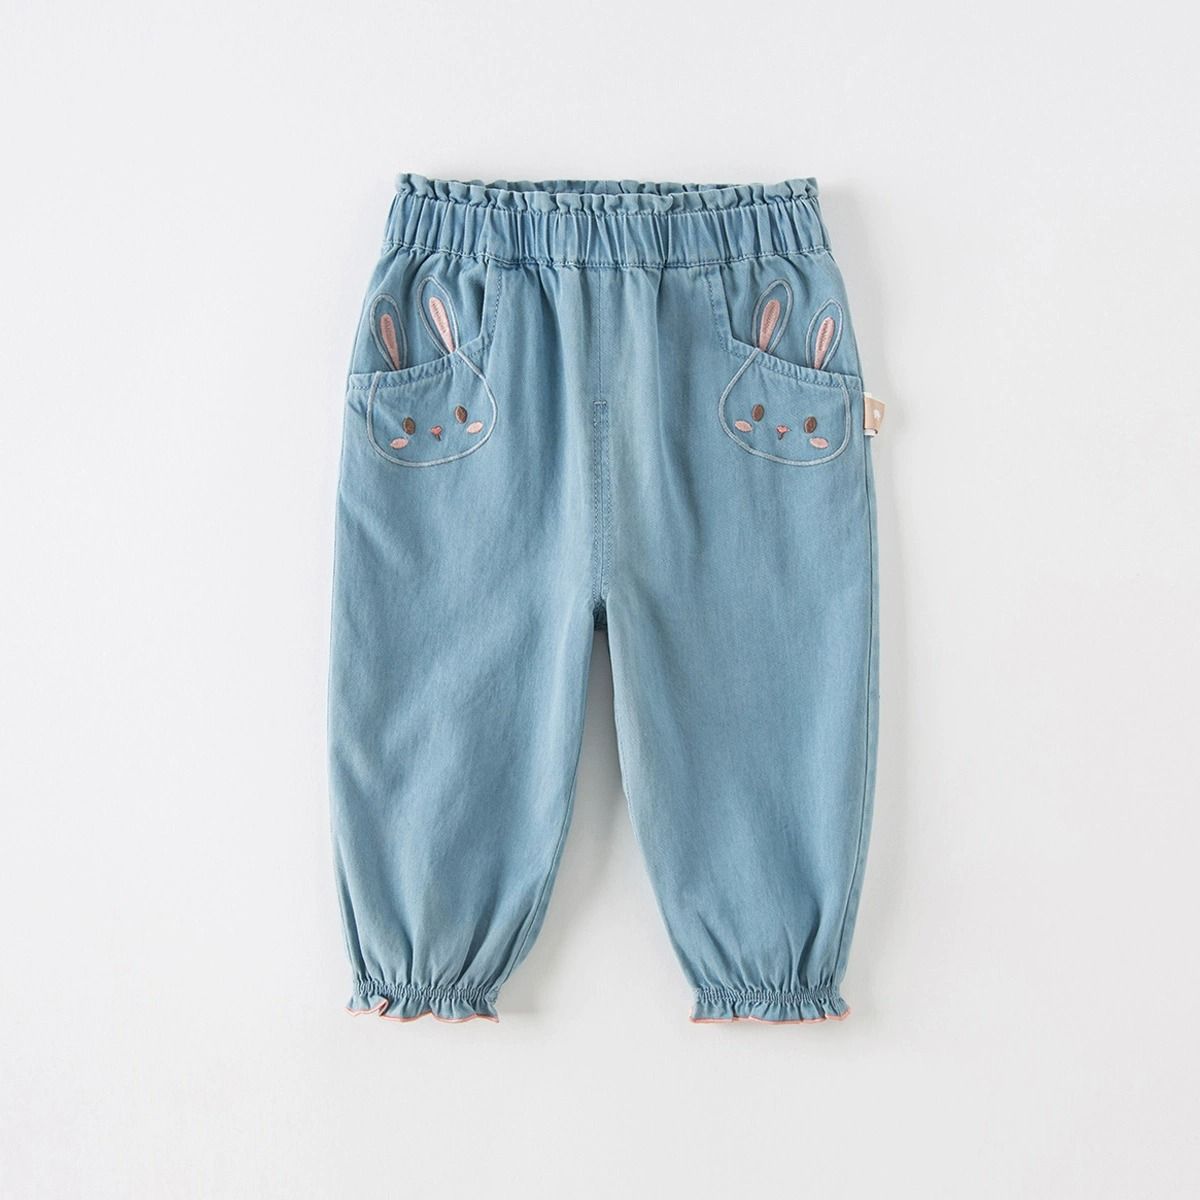 Girls' jeans spring and autumn new Korean style children's and baby's fashionable embroidered casual pants leggings trousers children's clothing